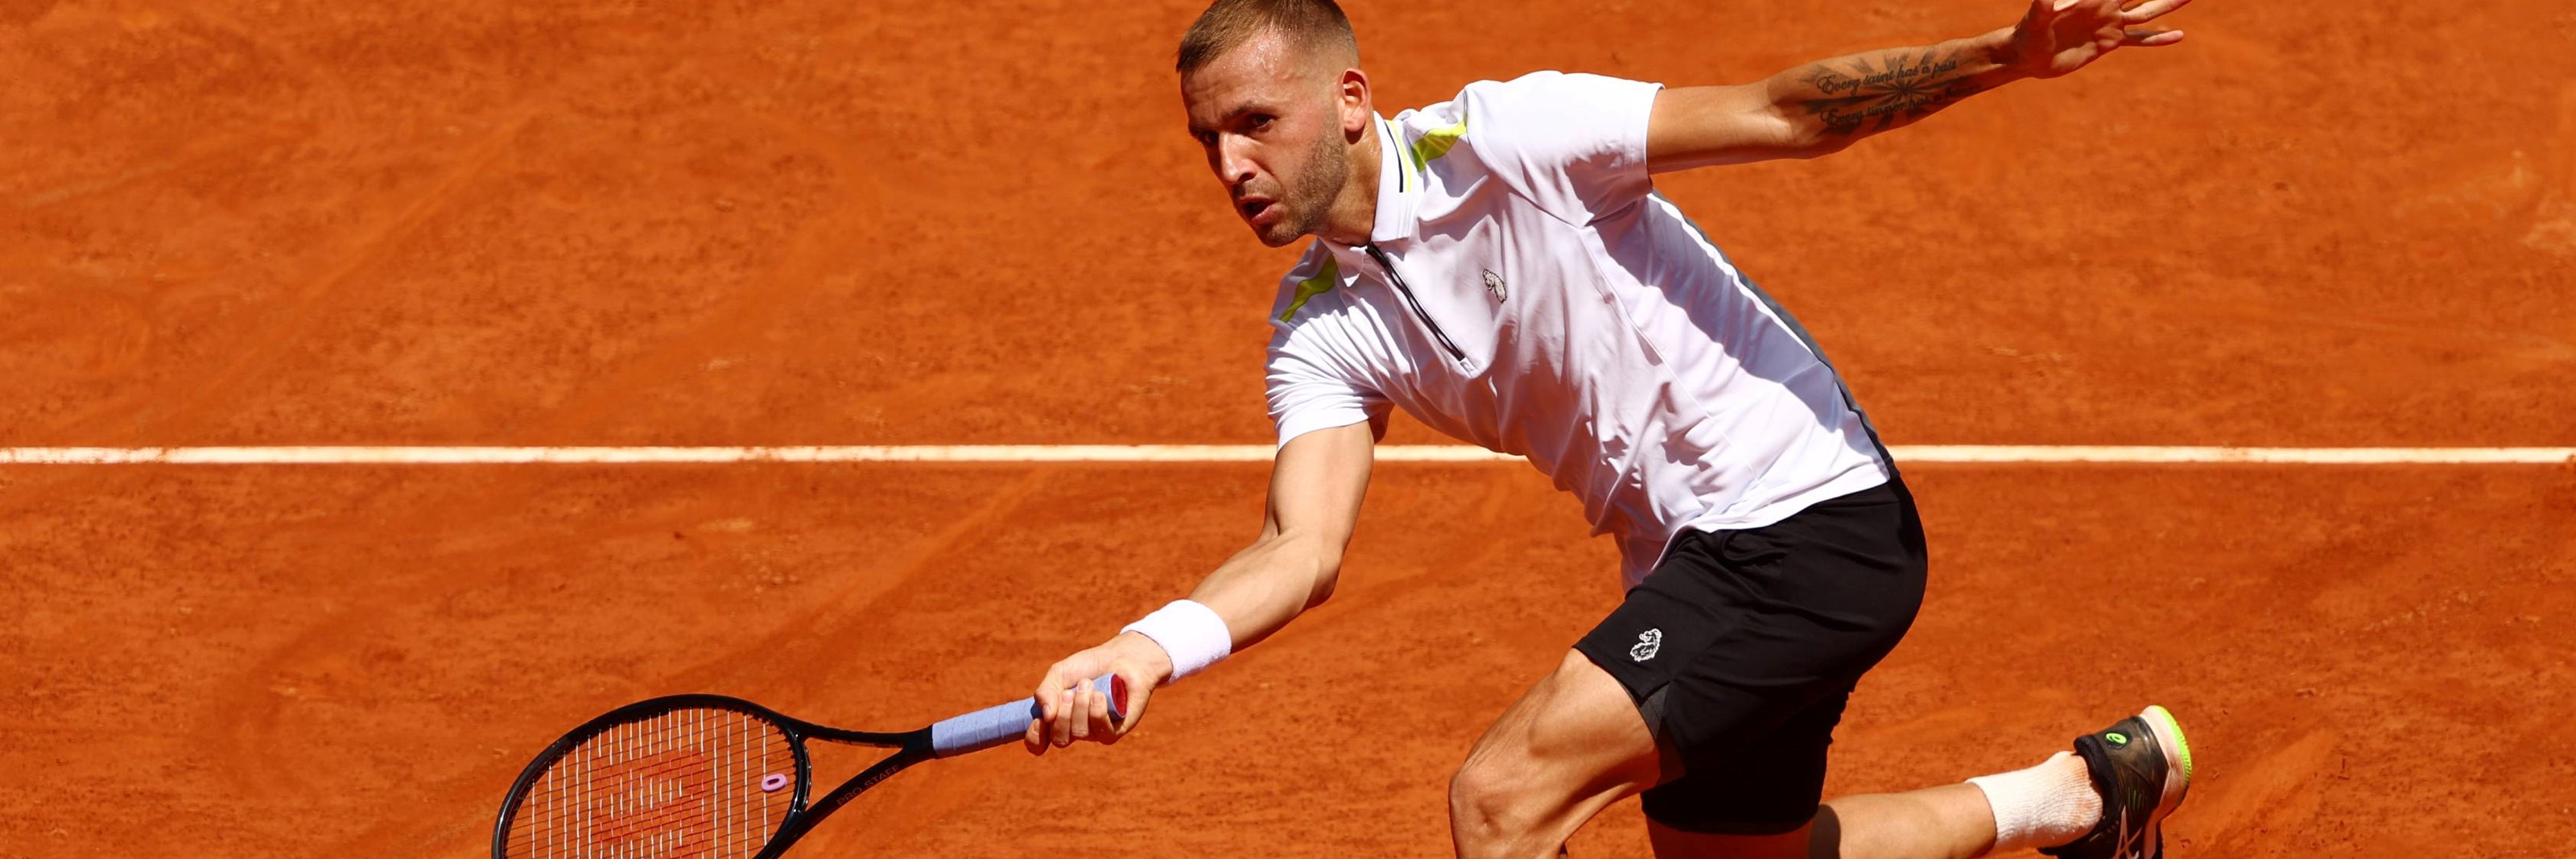 Dan Evans plays a volley at the Mutua Madrid Open